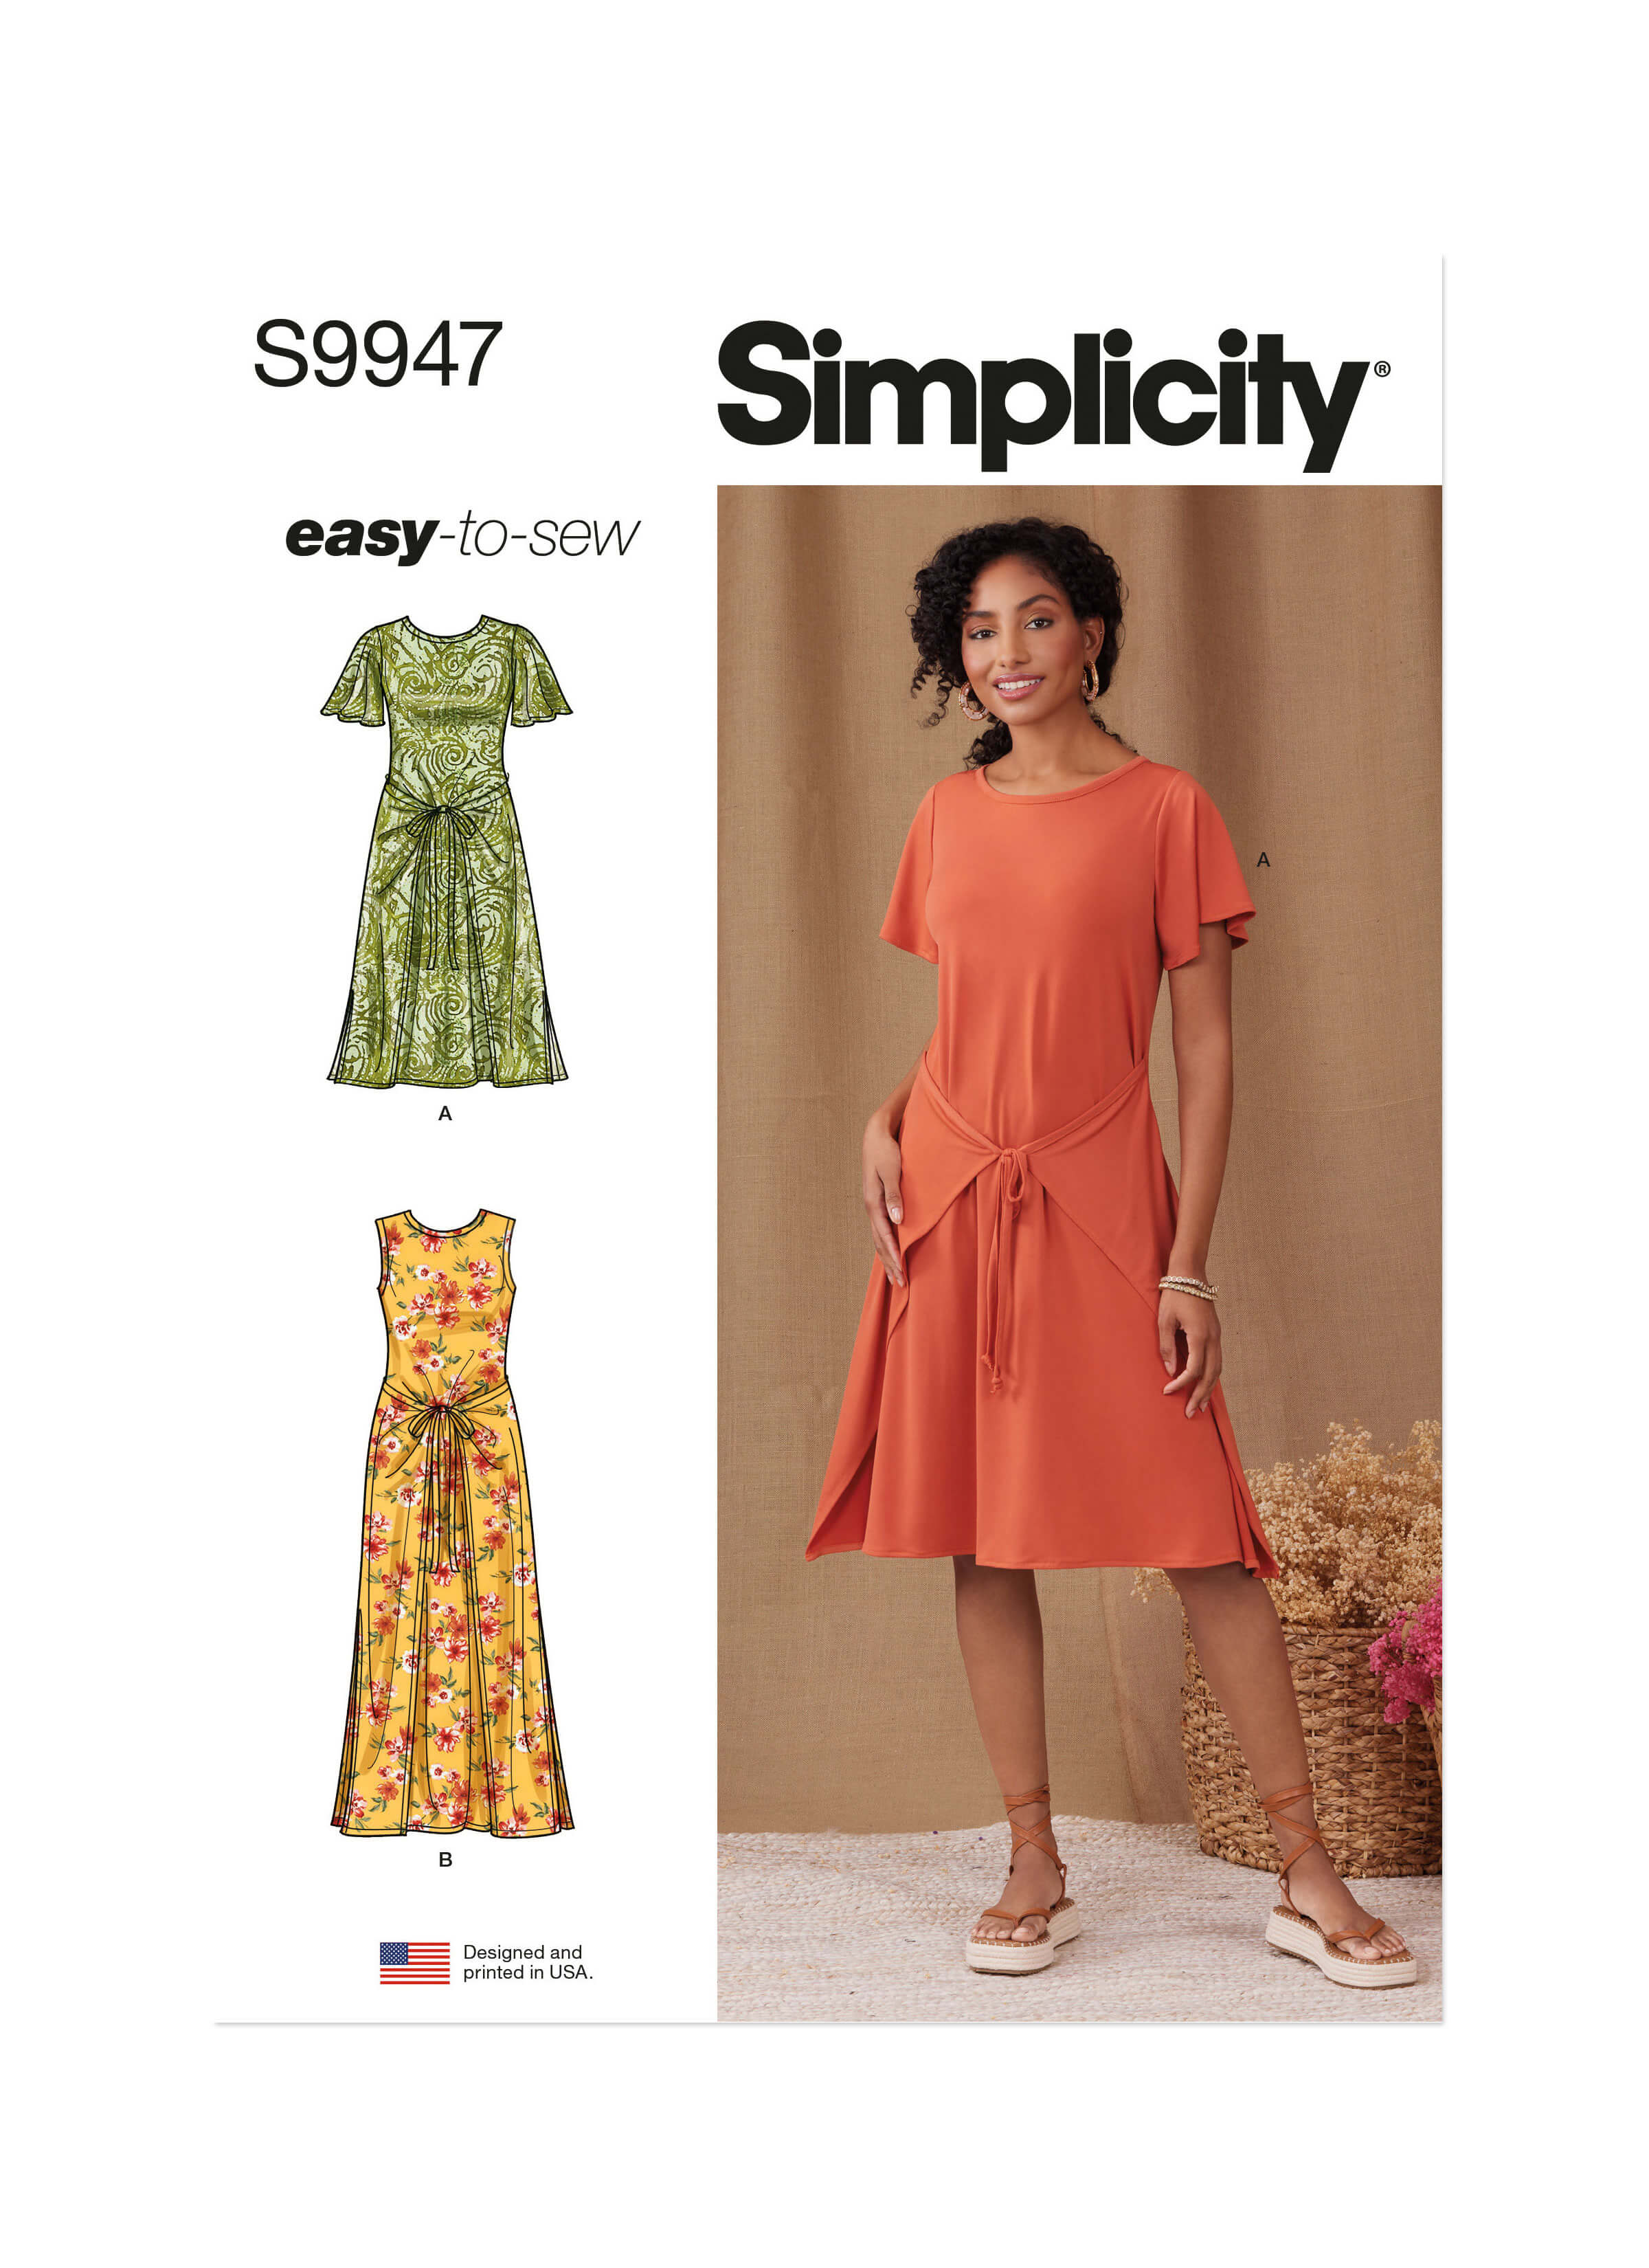 Simplicity Sewing Pattern S9947 Misses' Knit Dress with Sleeve and Length Variations